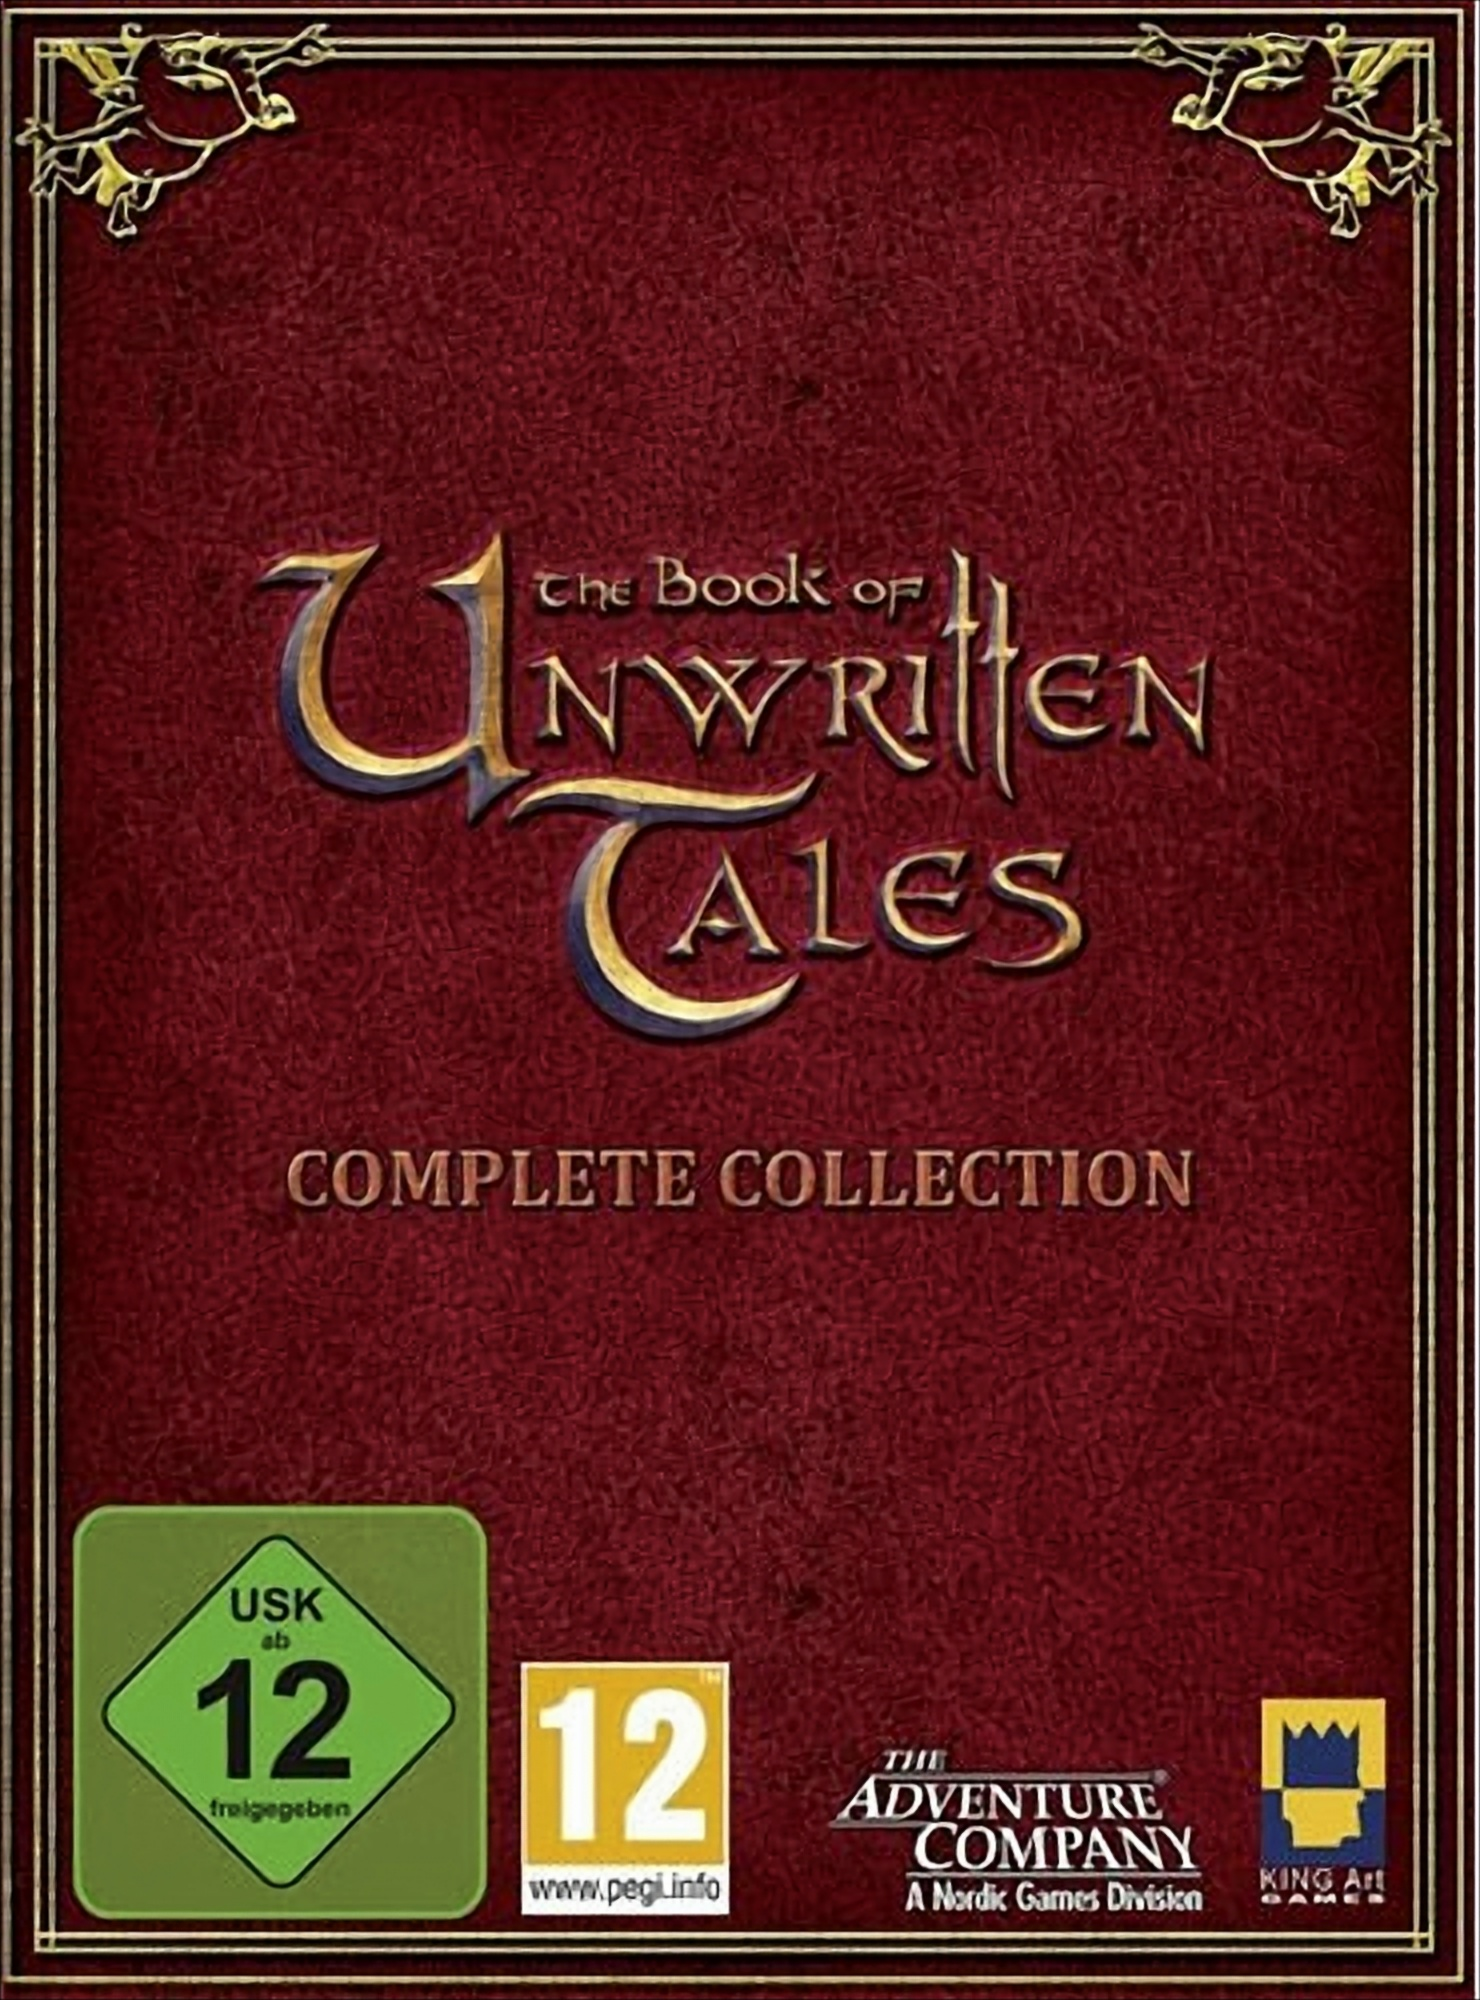 Unwritten The - Collection Of [PC] Book Tales - Complete